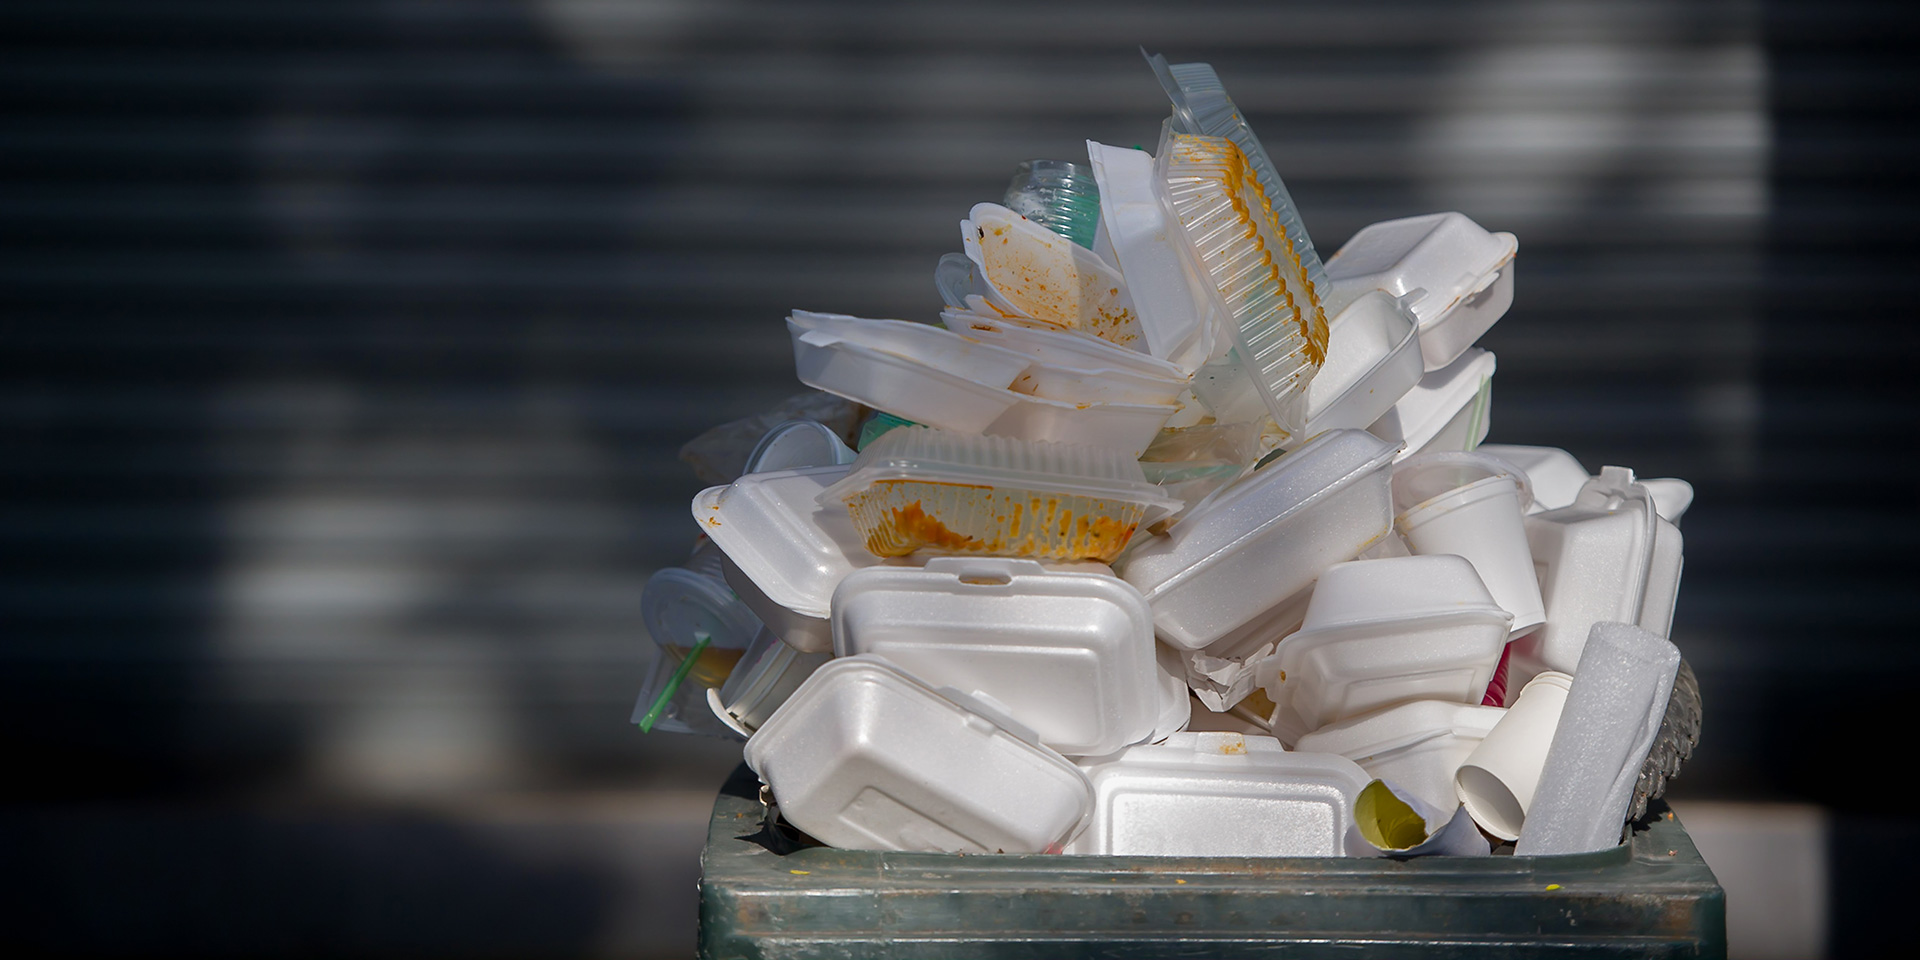 styrofoam and plastic food containers piled up